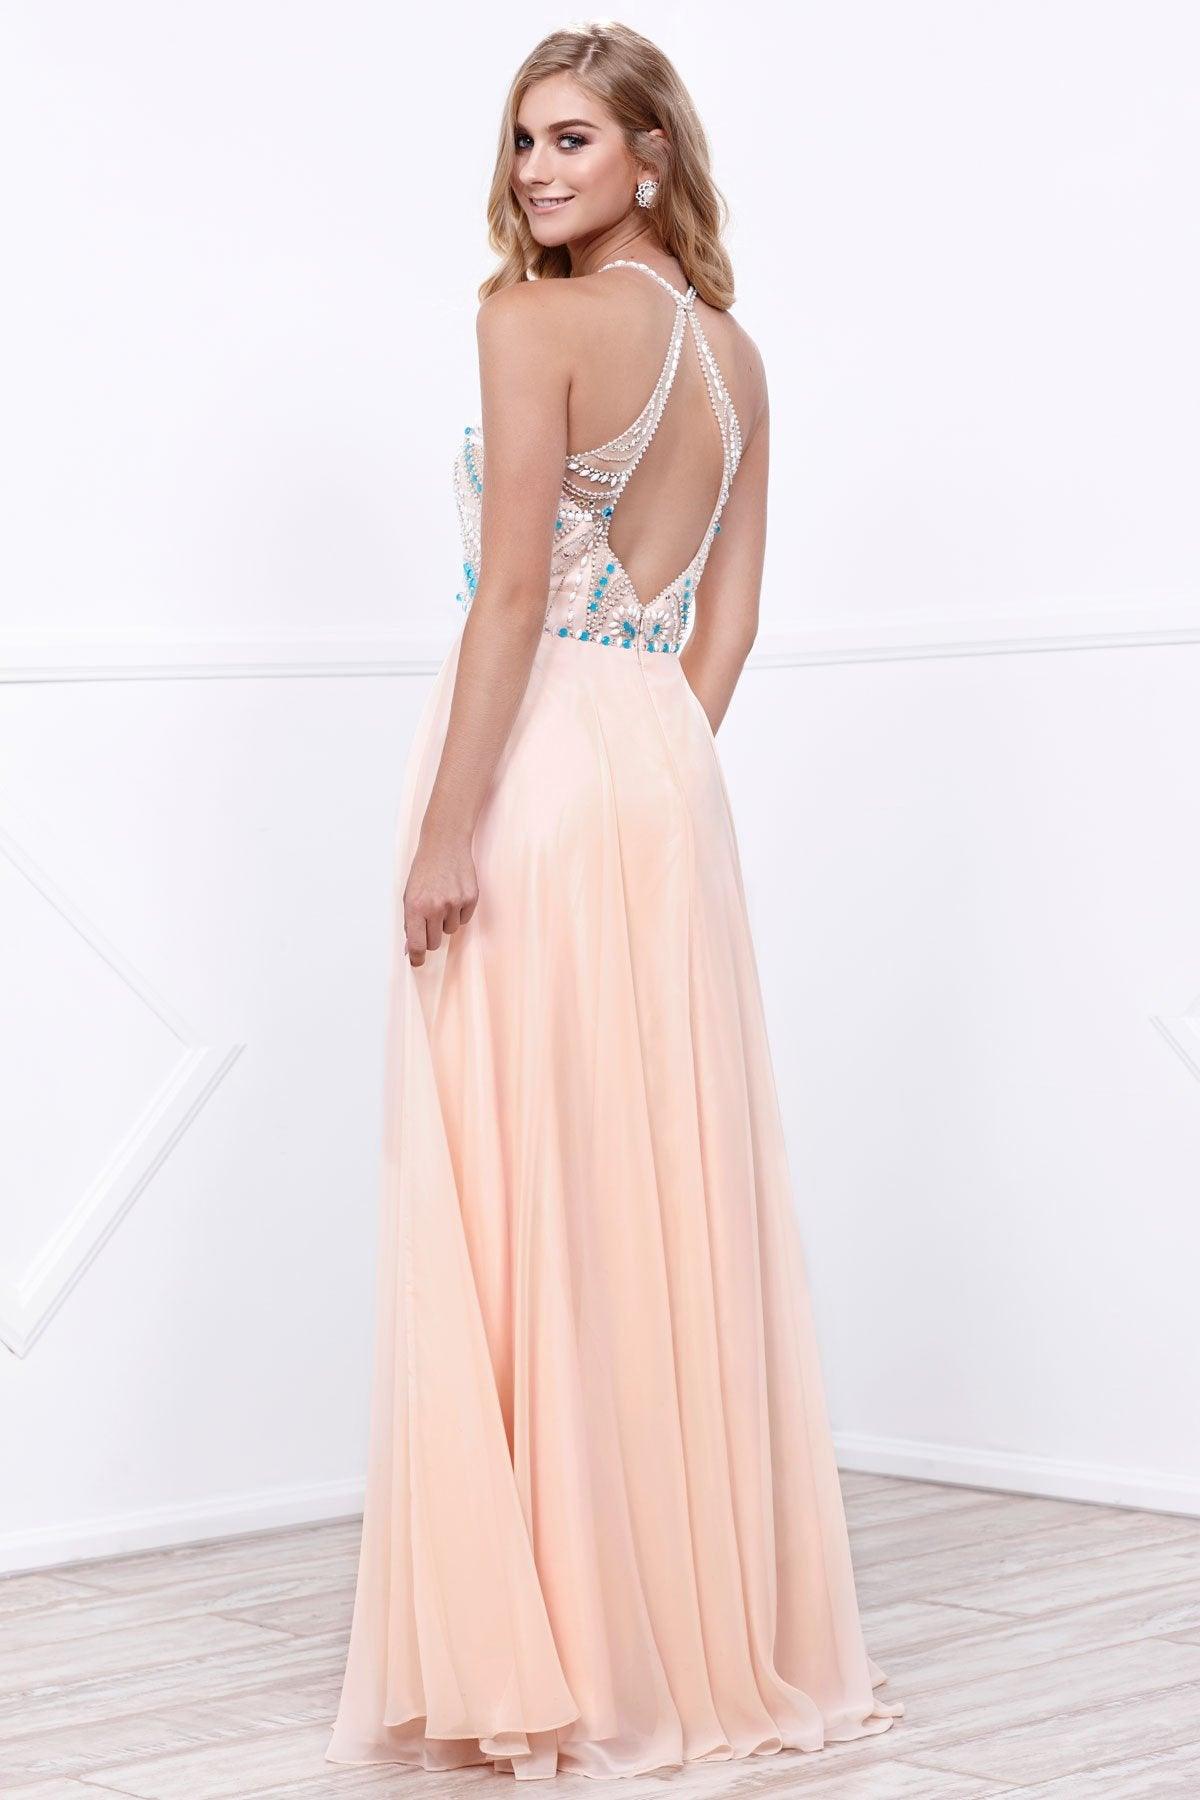 Long Prom Gown Formal Dress - The Dress Outlet Nox Anabel